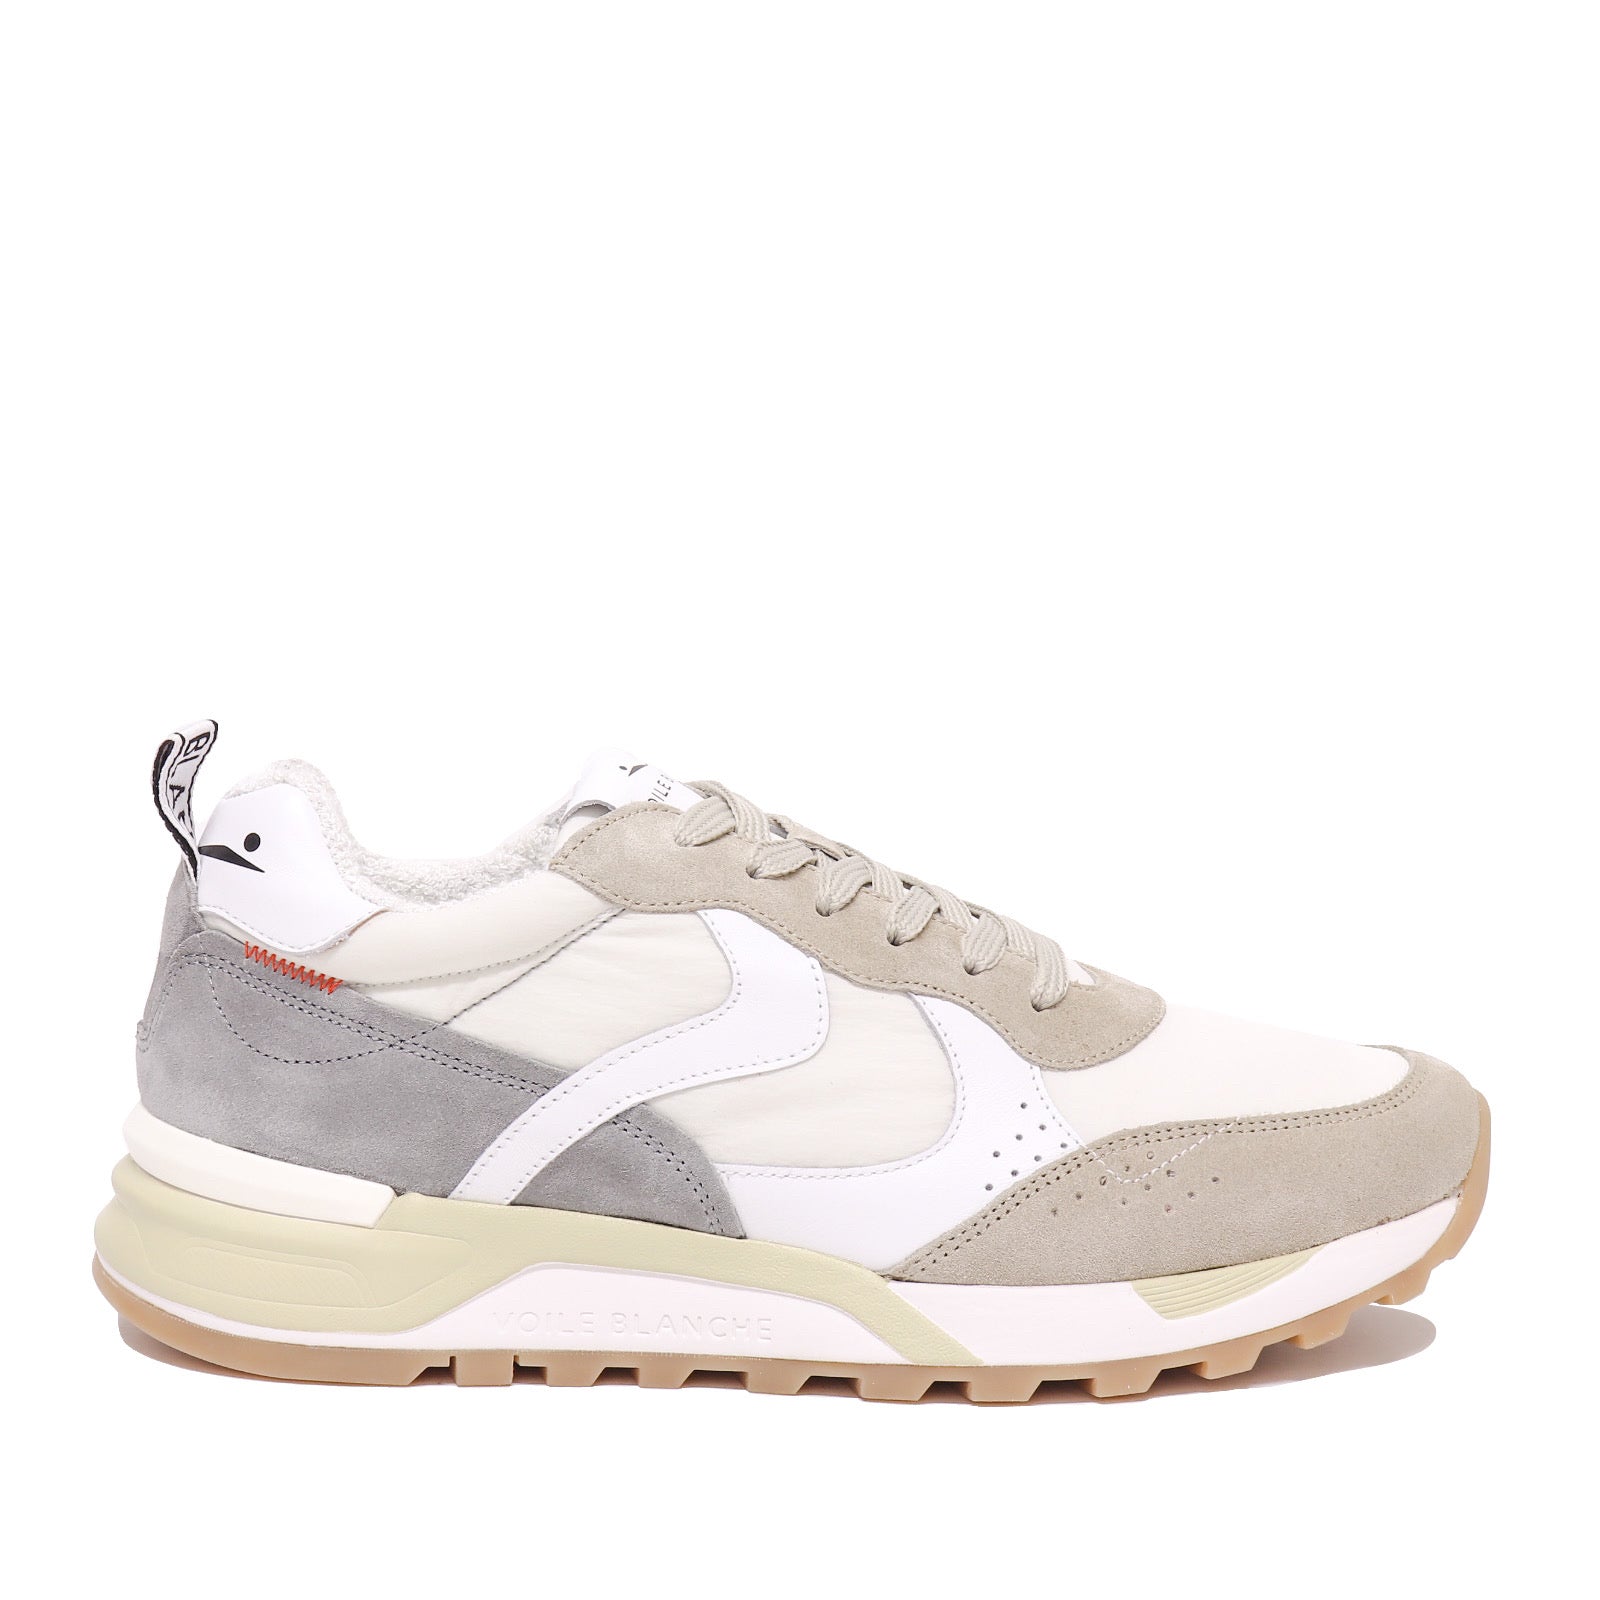 Voile Blanche Sneaker Magg